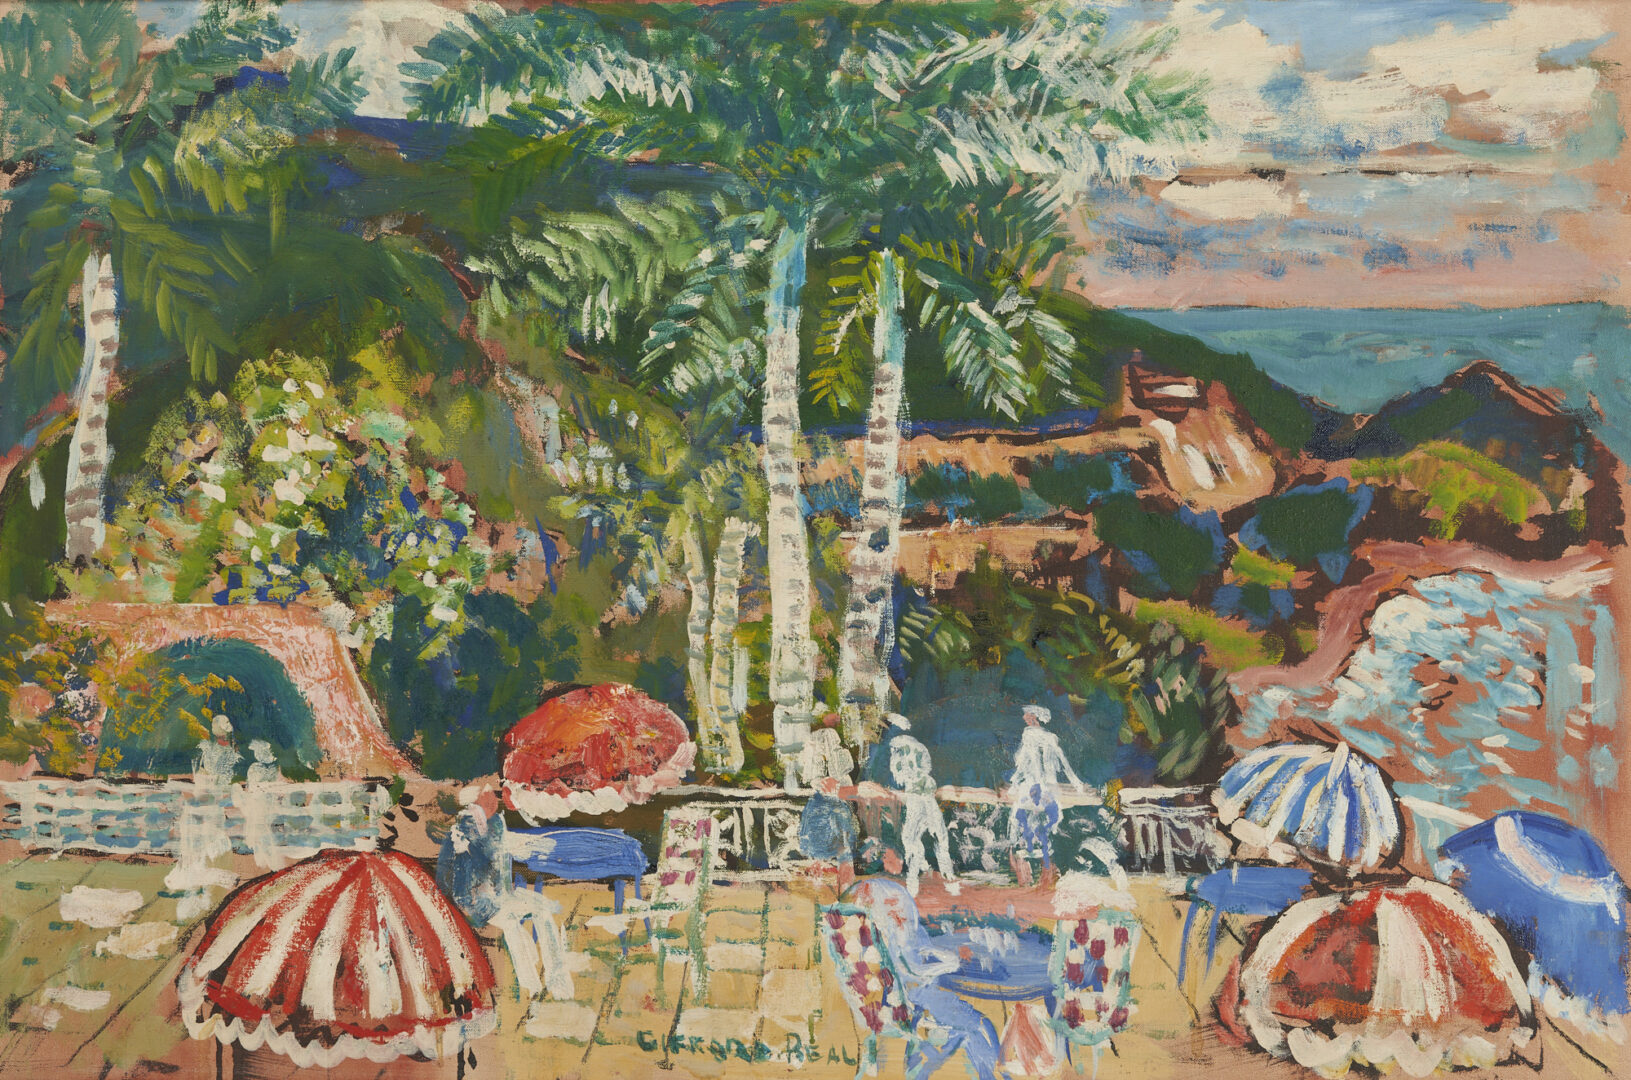 Lot 111: Gifford Beal Oil Painting, "Terrace, Ibo Lili"